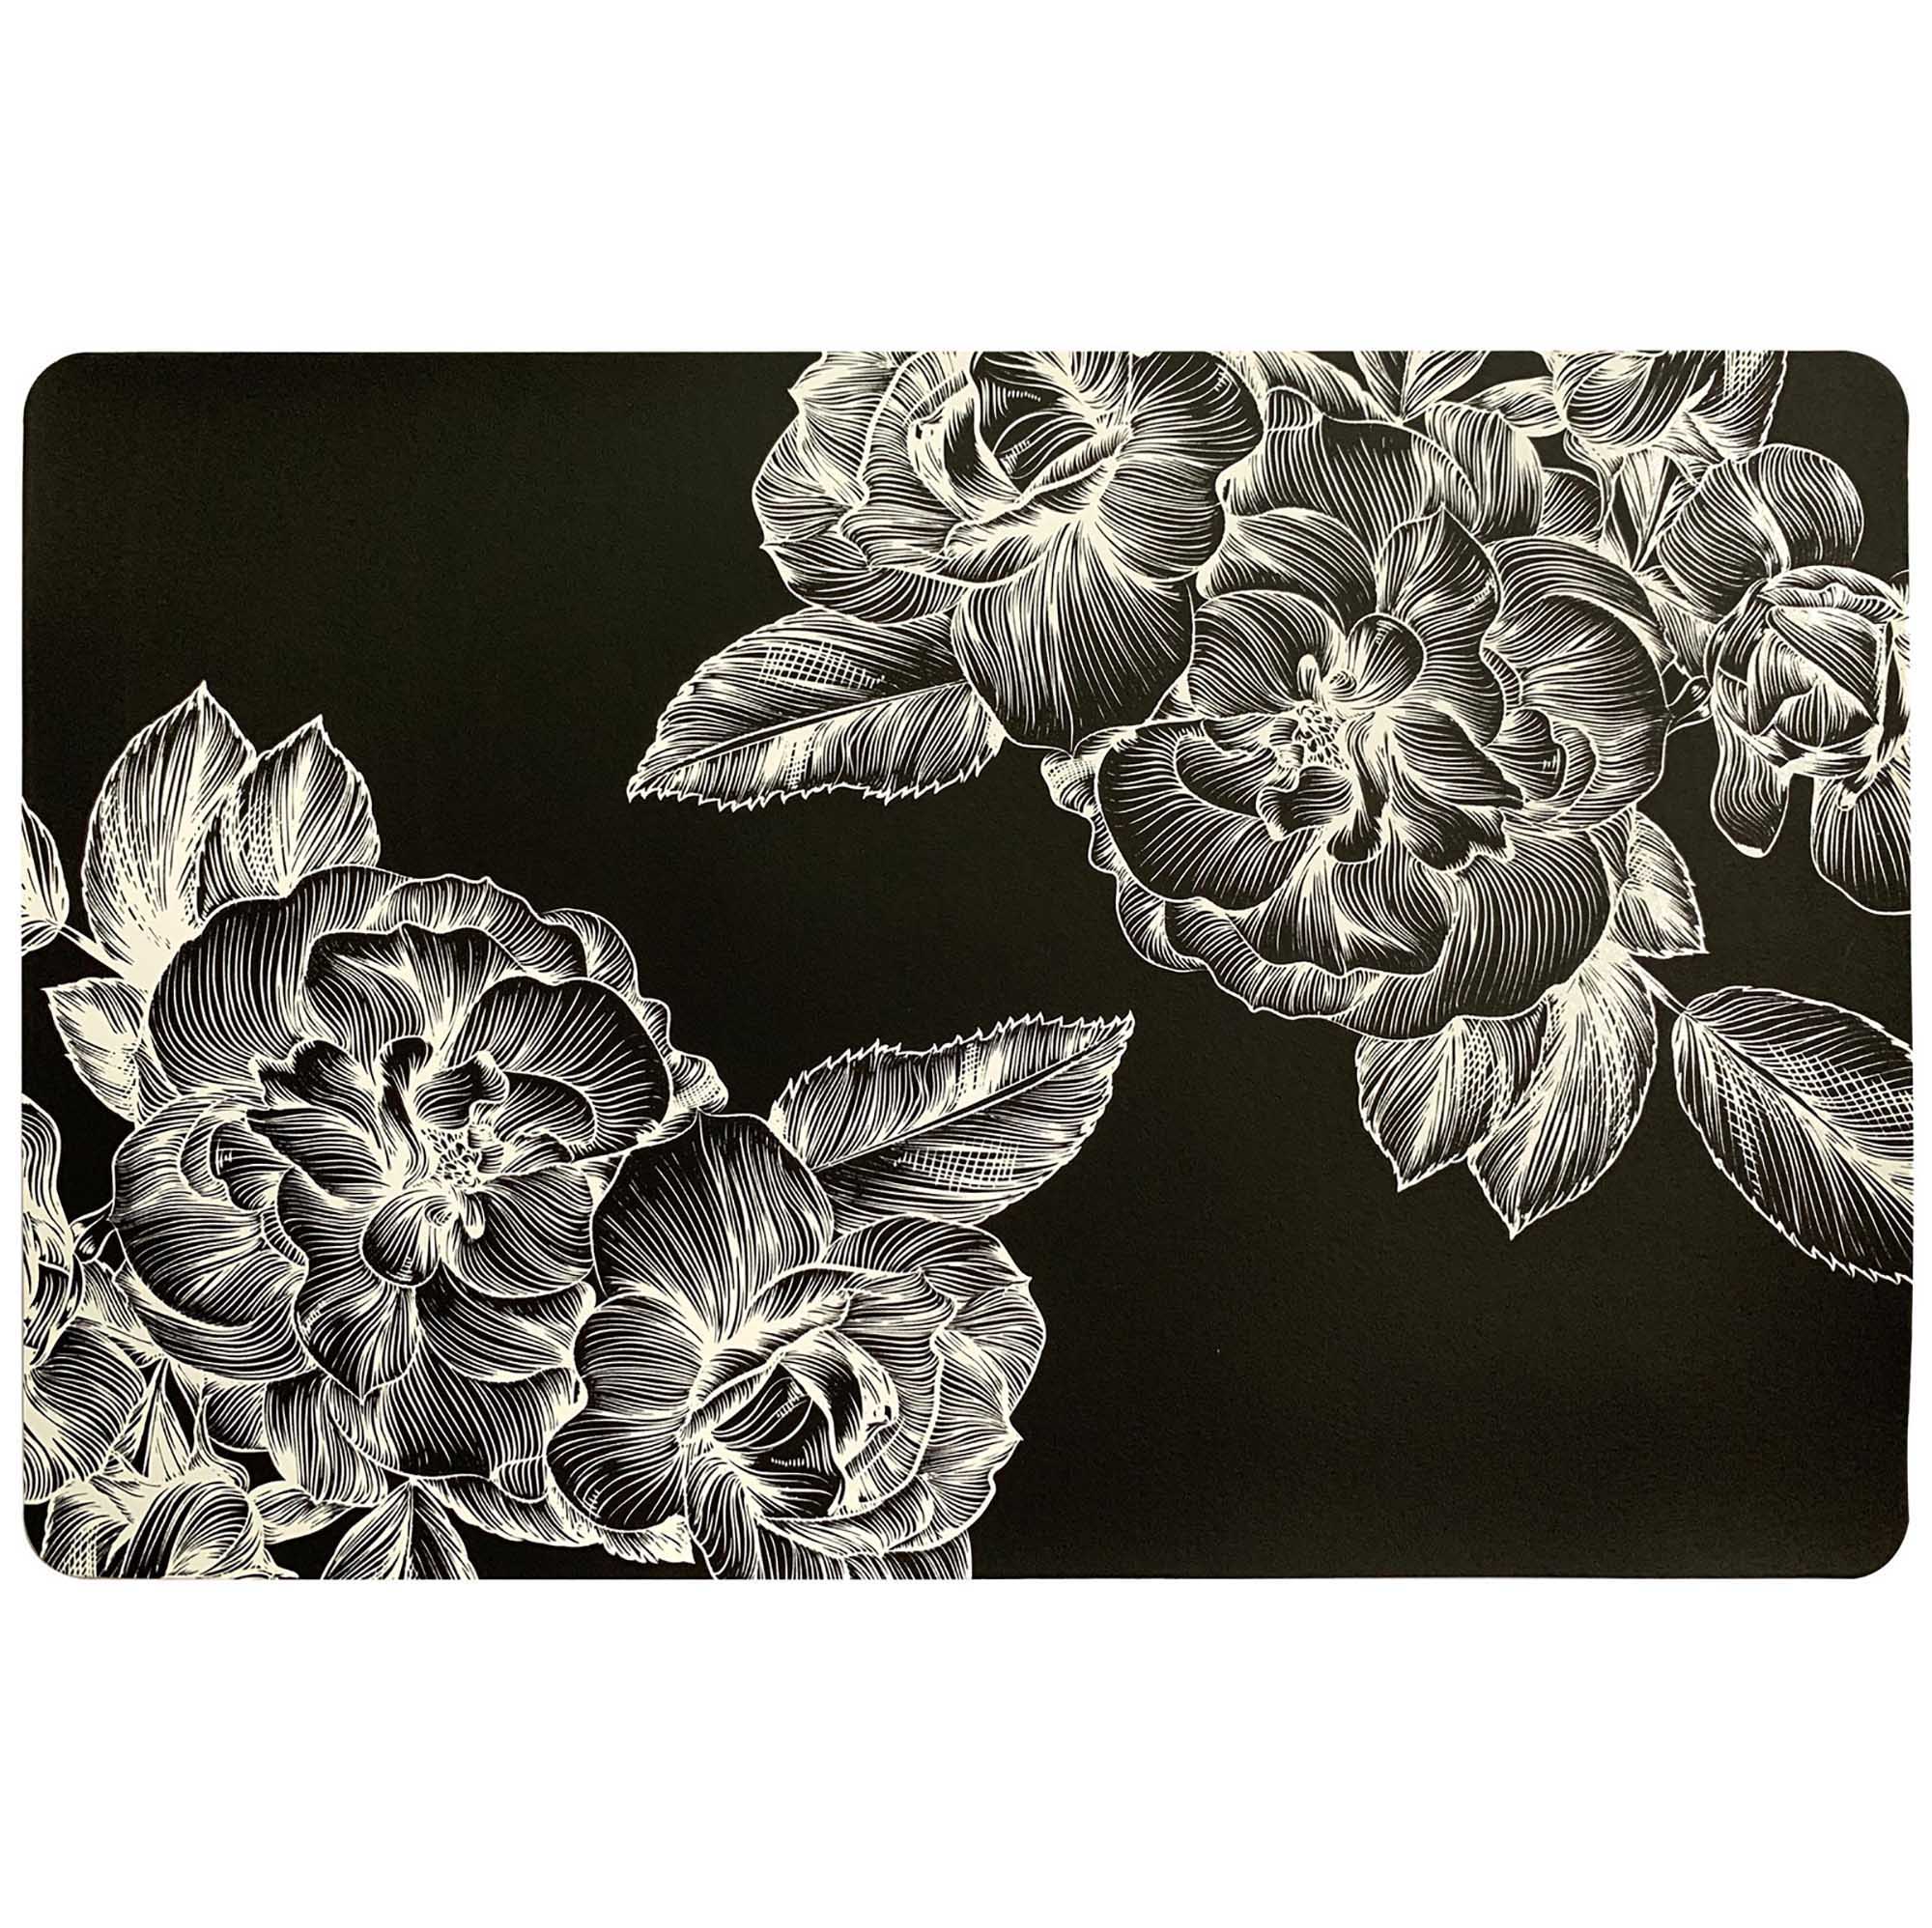 Black PVC Printed Floral Placemat 17x11.2in